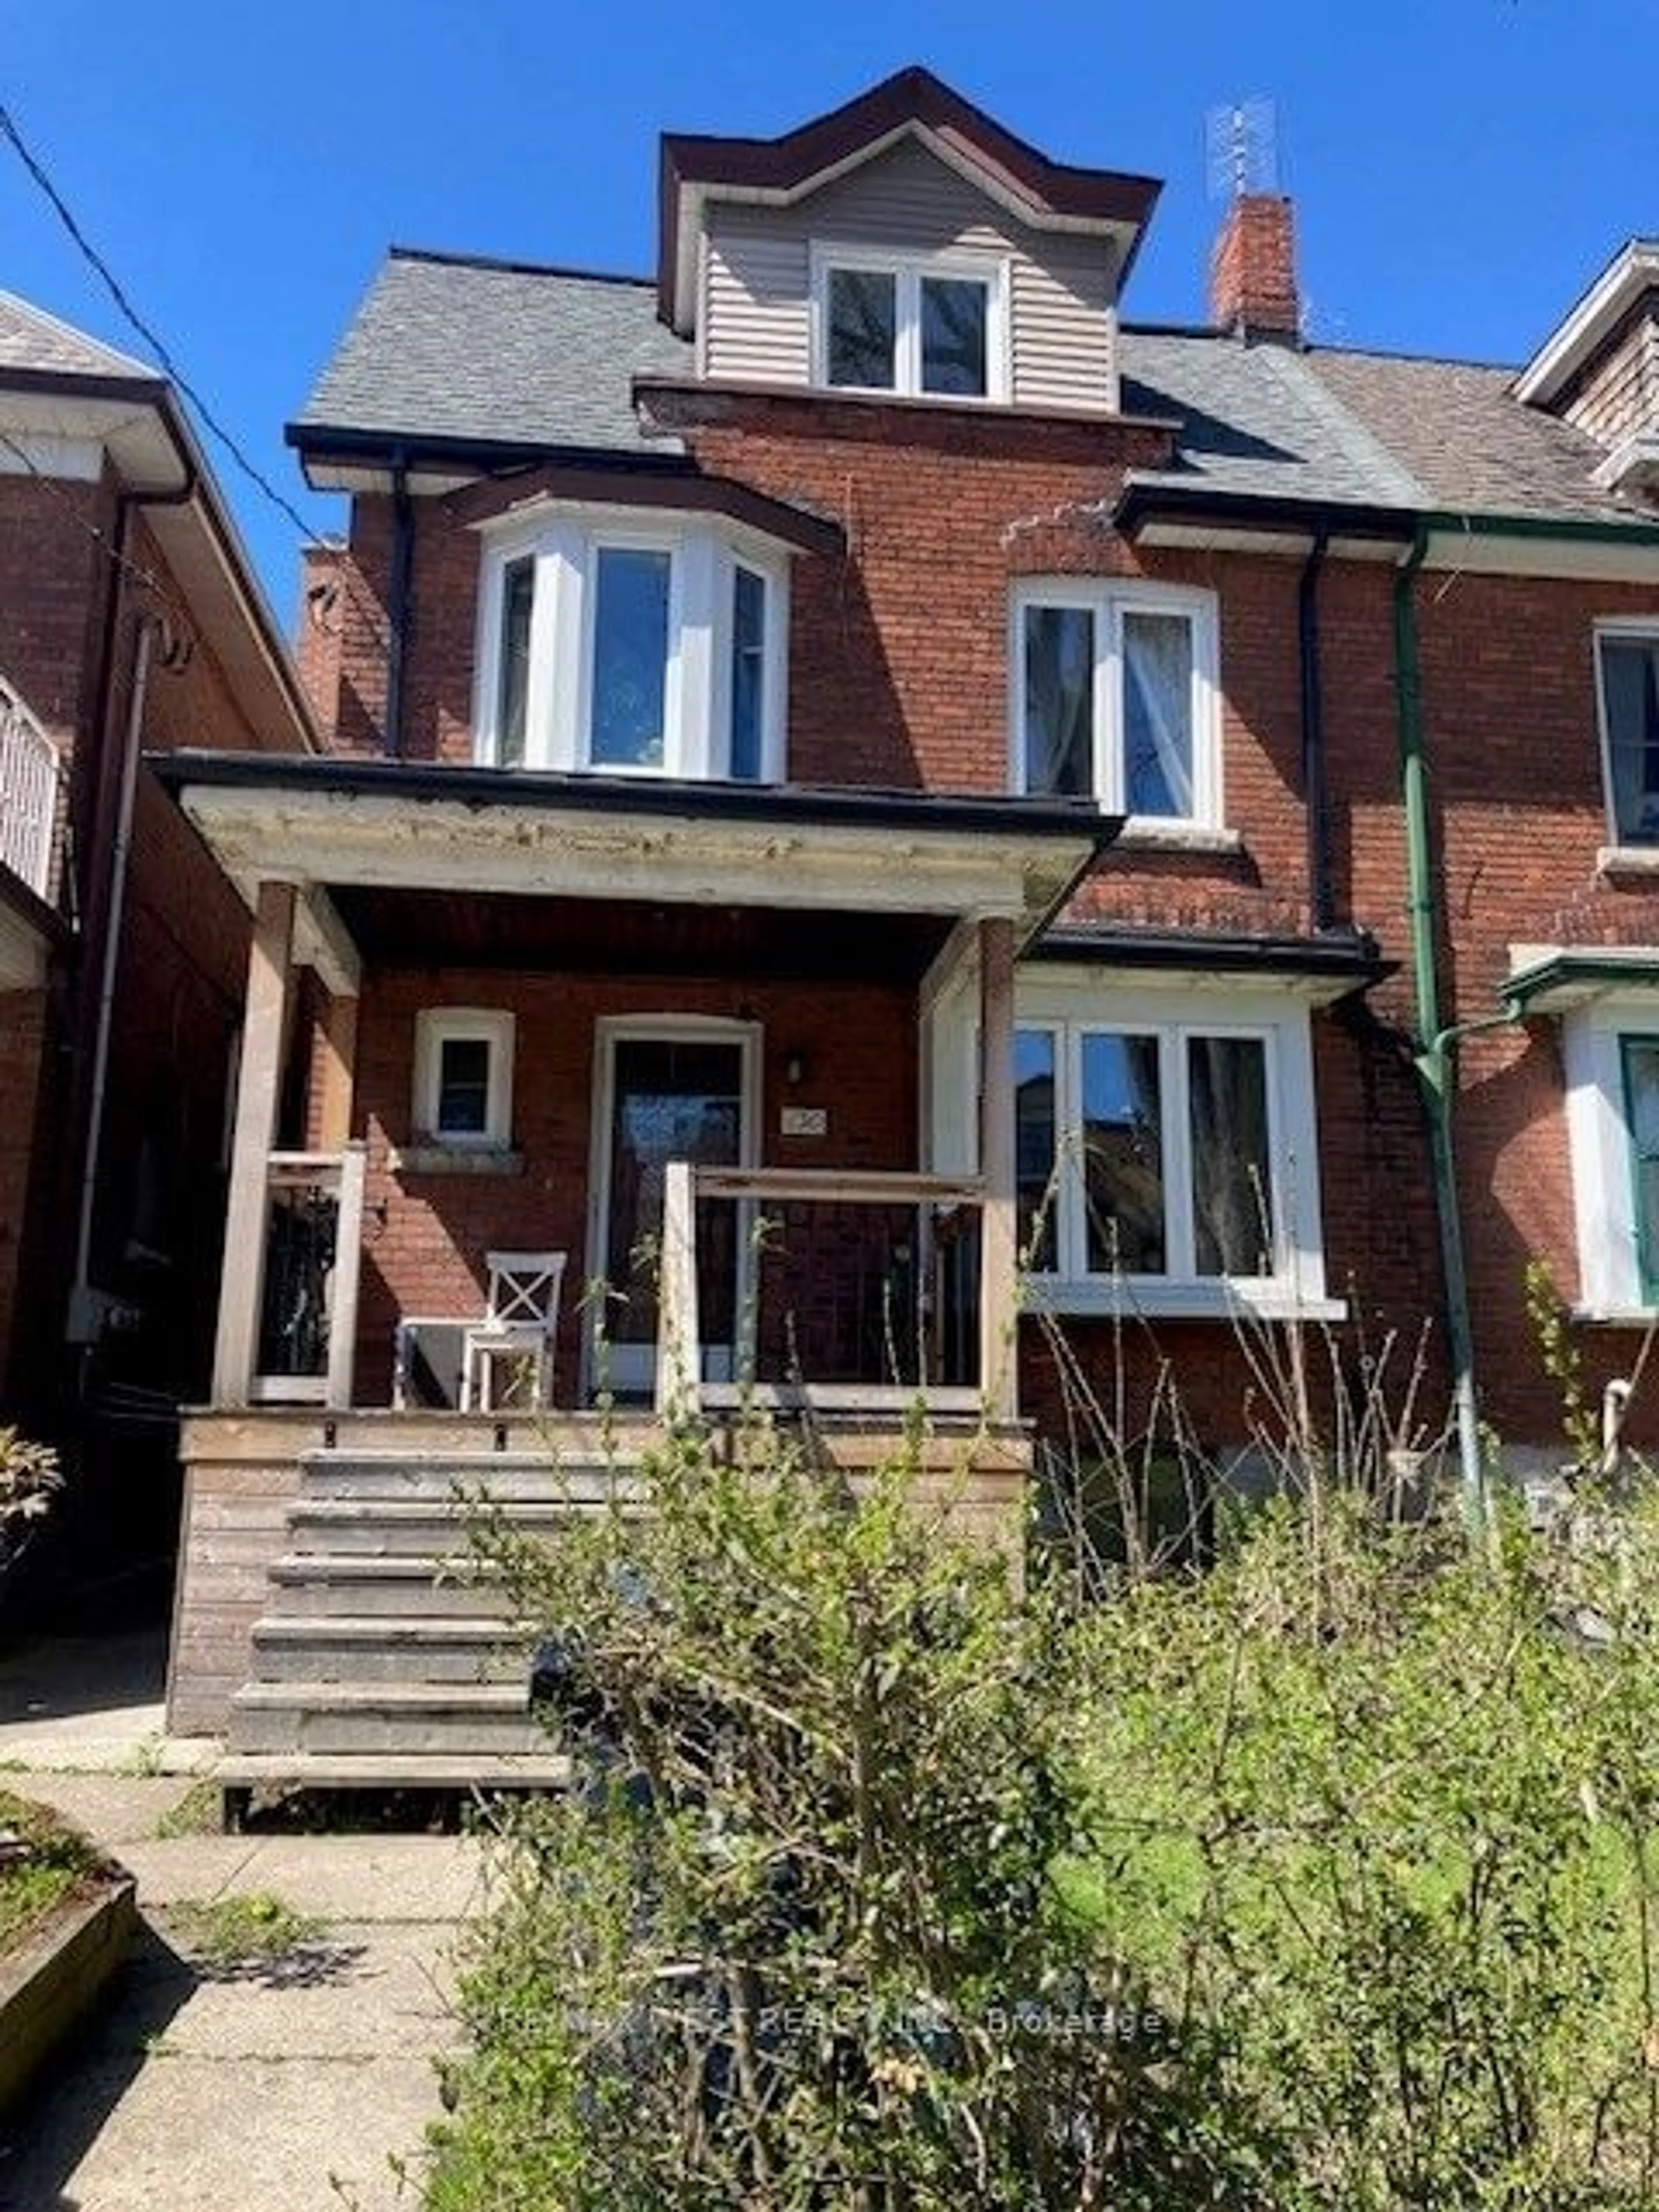 Home with brick exterior material for 130 Concord Ave, Toronto Ontario M6H 2P3